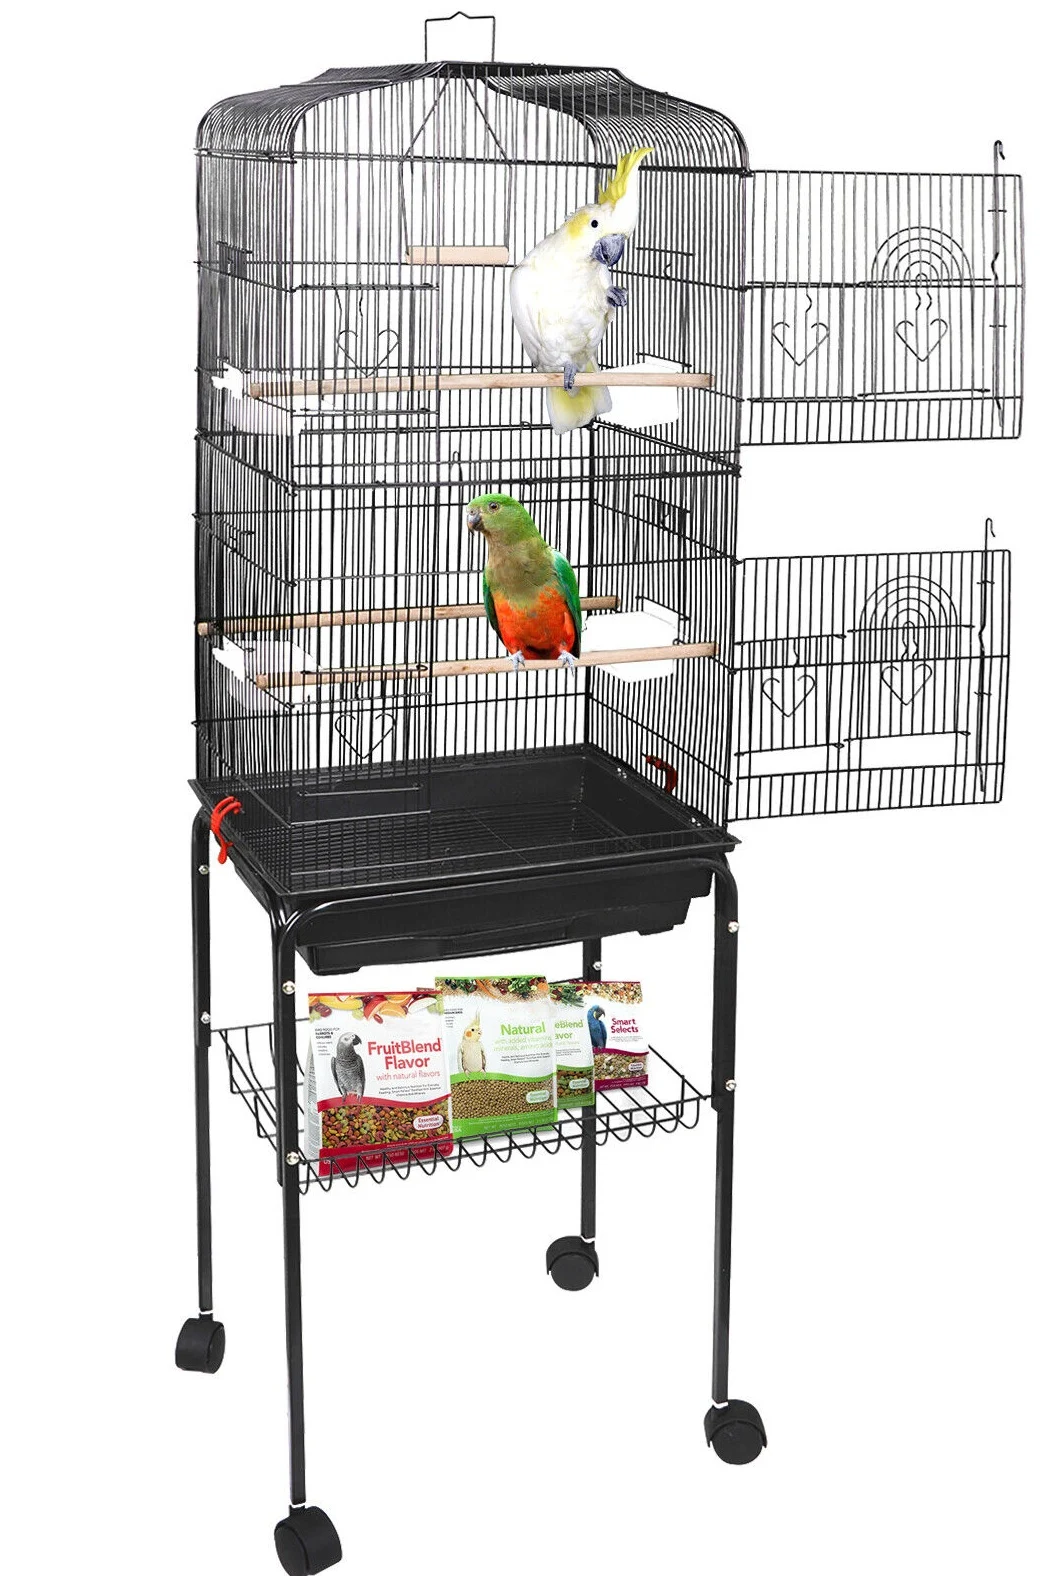 Bird cages for sell ebay.com/"" bird cages for sale on ebay""" bird cages for sale near me" ebay" bird cages for sale durban"" bird cages for sale sydney"" bird cages for sale south africa"" bird cages for sale pretoria"" bird cages for sale brisbane" bird cages for sale adelaide" bird cages for sale perth" bird cages for sale on amazon" bird cages for sale nz" bird cages for sale bunnings" bird cages for sale craigslist" bird cages for sale cheap" bird cages for sale uk" bird cages for sale amazon" bird cages for sale australia" bird cages for sale auckland" bird cages for sale asheville nc" bird and cage for sale"" birds and cages for sale" birds and cage for sale" bird cages for sale argos" bird cages for sale at petsmart" bird cages for sale adverts" bird cages for sale ayrshire" bird cages for sale amazon parrots" bird cage for sale albury wodonga" parrot cages for sale amazon" bird cages for sale belfast" bird cages for sale birmingham" bird cages for sale bundaberg" bird cages for sale bunbury" bird cages for sale bloemfontein" bird cages for sale bristol" bird breeding cages for sale" big bird cages for sale near me" bamboo bird cages for sale" bird cages for sale by owner" bird cages for sale bendigo" bird cages for sale big w" bird cages for sale brackenfell" bird cages for sale cork" bird cages for sale cape town" bird cages for sale christchurch" bird cages for sale cardiff" bird cages for sale central coast" bird cages for sale canberra" bird cages for sale caboolture" bird cages for sale calgary" bird cages for sale cairns" bird cages for sale conure" bird cages for sale chicago illinois" bird cages for sale caboolture area" bird cages for sale cleveland ohio" bird cages for sale dublin" bird cages for sale durban gumtree" bird cage for sale dubai" bird cage for sale in abu dhabi" bird cages for sale derbyshire" bird cages for sale durham" bird cages for sale denver colorado" bird cages for sale dog" bird cage for sale doncaster" bird cage for sale darwin" parrot cages for sale devon" parrot cages for sale doncaster" bird cages for sale near doncaster" bird cages for sale in denver" bird cages for sale ebay" bird cages for sale edmonton" bird cages for sale ebay uk" bird cage for sale etsy" bird cages for sale port elizabeth" bird cages for sale in egypt" bird cages for sale in eugene oregon" bird cages for sale in exeter" used bird cages for sale ebay" parrot cages for sale in edinburgh" exotic bird cages for sale" enclosed bird cages for sale" large bird cages for sale on ebay" elegant bird cages for sale" bird cage elevator for sale" bird cages for sale facebook marketplace" birds for cages for sale" bird cages for sale facebook" bird cages for sale free" bird cages for sale sarasota florida" bird cages for sale in florida" bird cages for sale tampa florida" bird cages for sale in fresno" bird cages for sale gainesville fl" bird cage for sale in faisalabad" bird cage for sale jacksonville fl" bird cage for sale orlando fl" caged birds for sale near ferndown" fancy bird cages for sale" bird flight cages for sale" bird cages for sale gumtree" bird cages for sale geelong" bird cages for sale gold coast" bird cages for sale gauteng" bird cages for sale glasgow" bird cages for sale gumtree perth wa" bird cages for sale gympie" bird cages for sale gumtree brisbane" bird cage for sale gumtree melbourne" parrot cages for sale gumtree" parrot cages for sale glasgow" bird cages for sale in gloucester" bird cages for sale sydney gumtree" bird cages for sale hobart"" bird cages for sale hartlepool bird cages for sale houston texas" bird cages for sale heanor" bird cage for sale hervey bay" bird cage for sale houston" parrot cages for sale hull" bird cages for sale second hand" bird cages for sale in hull" bird cage for sale in hyderabad" bird cage for sale in hartford" bird cages for sale pets at home" parrot cages for sale second hand" handmade bird cages for sale" homemade bird cages for sale" bird cages for sale in sri lanka" bird cages for sale in karachi" bird cages for sale ireland" bird cages for sale in pietermaritzburg" bird cages for sale ipswich" bird cages for sale in pakistan" bird cages for sale in chatsworth" bird cages for sale in boksburg" bird cages for sale in trinidad" bird cages for sale in phoenix durban" bird cages for sale in melbourne" bird cages for sale in geelong" bird cages for sale in" bird cages for sale in nottingham" bird cages for sale in miami" bird c"ages for sale johannesburg" bird cages for sale jhb parrot cages for sale johannesburg" bird cages for sale in joliet illinois" bird cage for sale in jamaica" japanese bird cages for sale" jambul bird cage for sale in singapore" second hand bird cages for sale in johannesburg" bird cage for sale olx karachi" bird cages for sale kijiji" bird cages for sale kzn" bird cages for sale kroonstad" bird cages for sale kidderminster" bird cage for sale karachi" parrot cages for sale kent" bird cages for sale in kent" bird cages for sale ontario kijiji" bird cages for sale topeka kansas" bird cage for sale in kuwait" bird cage for sale toronto kijiji" big bird cages for sale in karachi" unusual bird cages for sale uk" bird cages for sale liverpool" bird cages for sale london" large bird cages for sale"" large bird cages for sale near me"" love bird cages for sale"" "large bird cages for sale used"" bird cages for sale leeds"" bird cages for sale lorikeet"" bird cage for sale lahore""" bird cage for sale leicester"" bird cage for sale local""